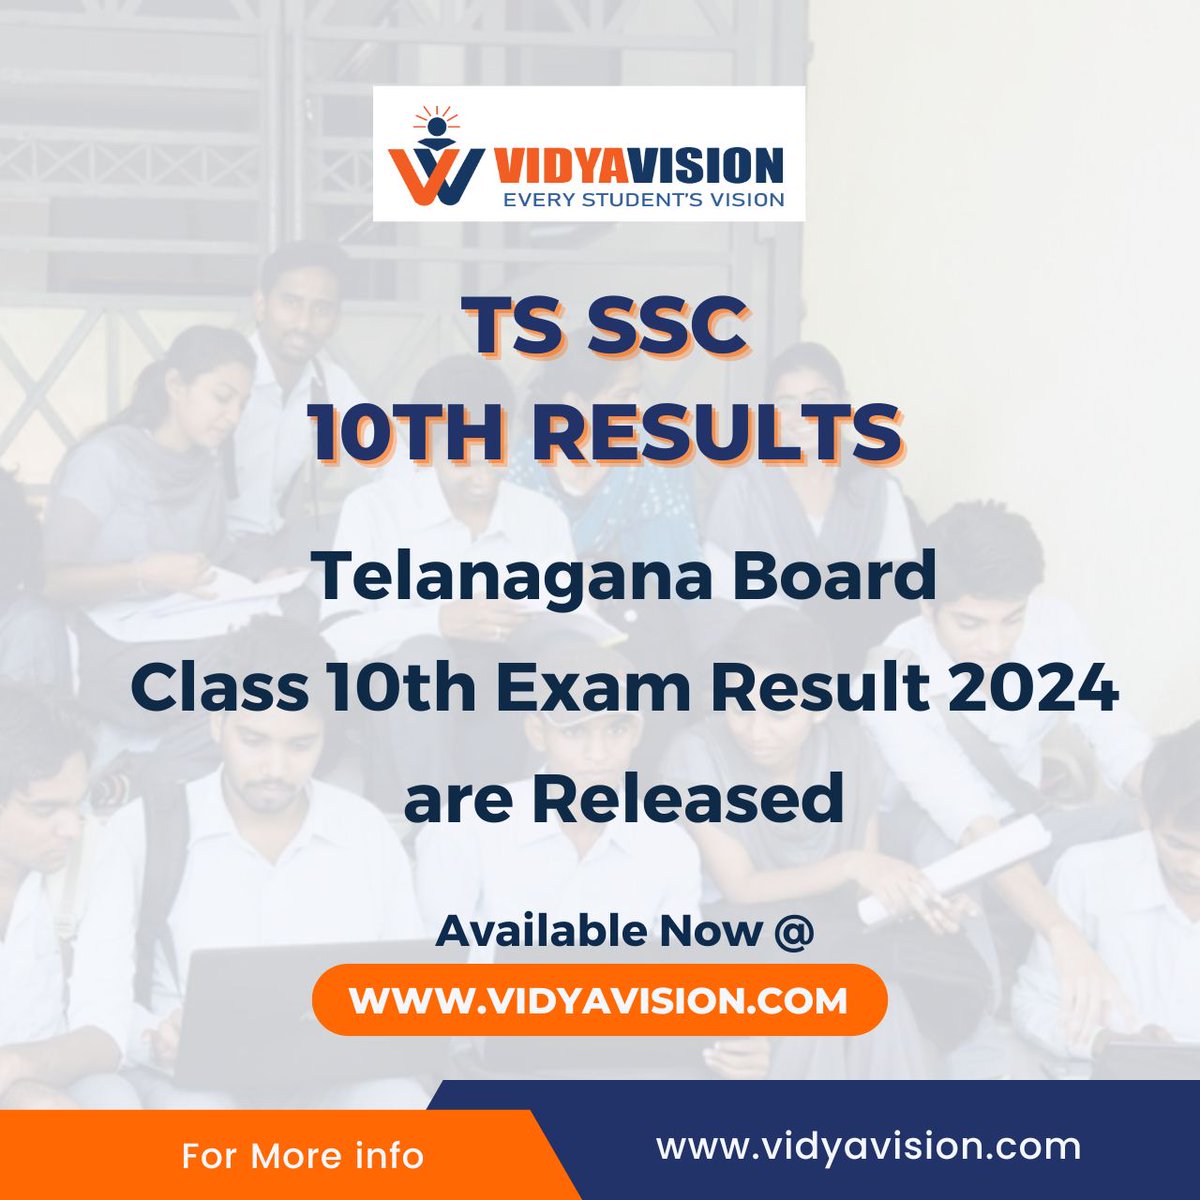 TS SSC (10th) Results are Released 2024
Check Now - rb.gy/k9yrgo

or visit vidyavision.com to check your results

#tsssc #sscresults #telanganassc #10thresults #vidyavision #boardresults